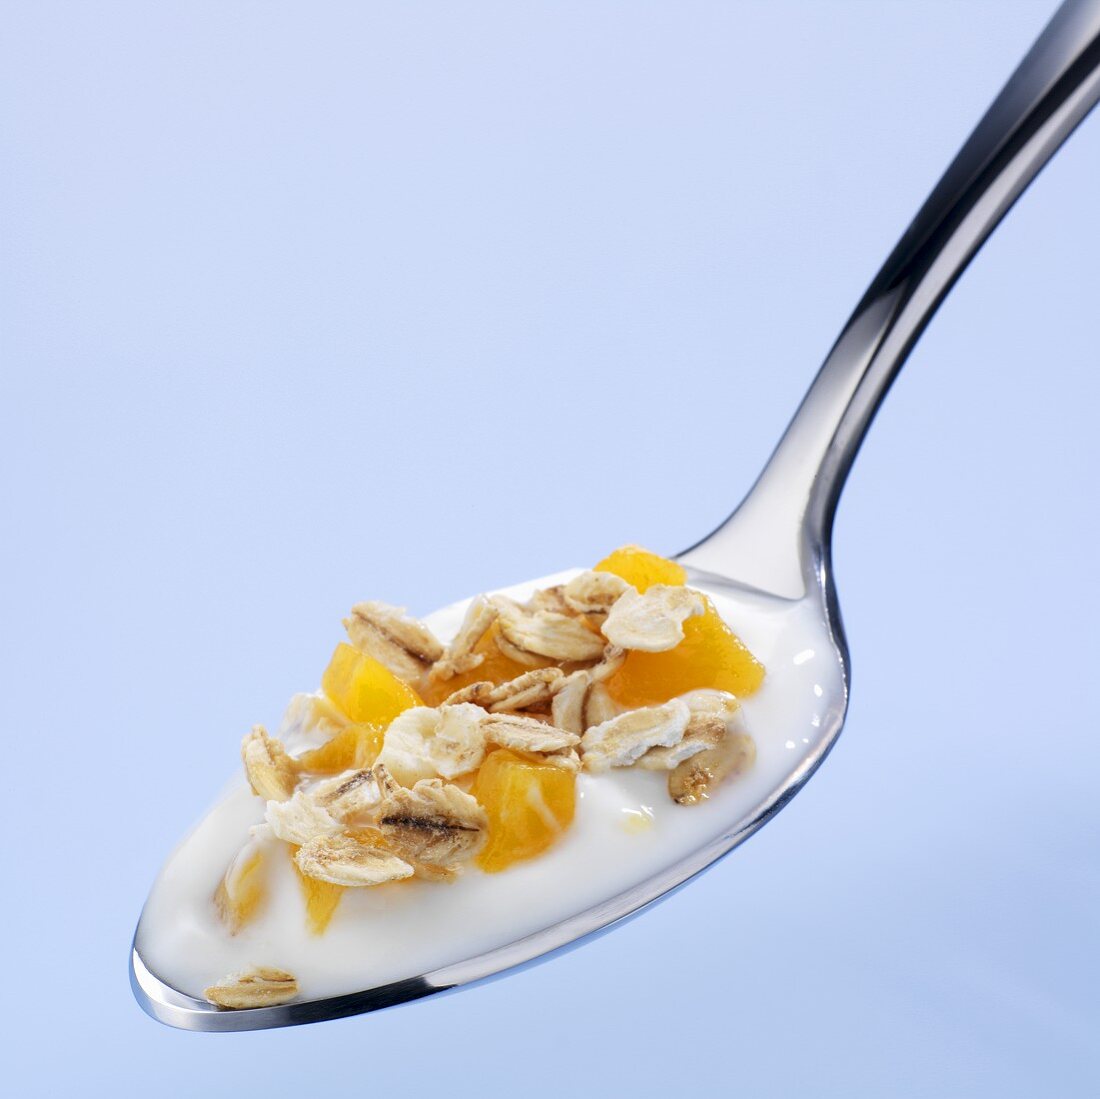 A spoonful of yoghurt with peach and muesli